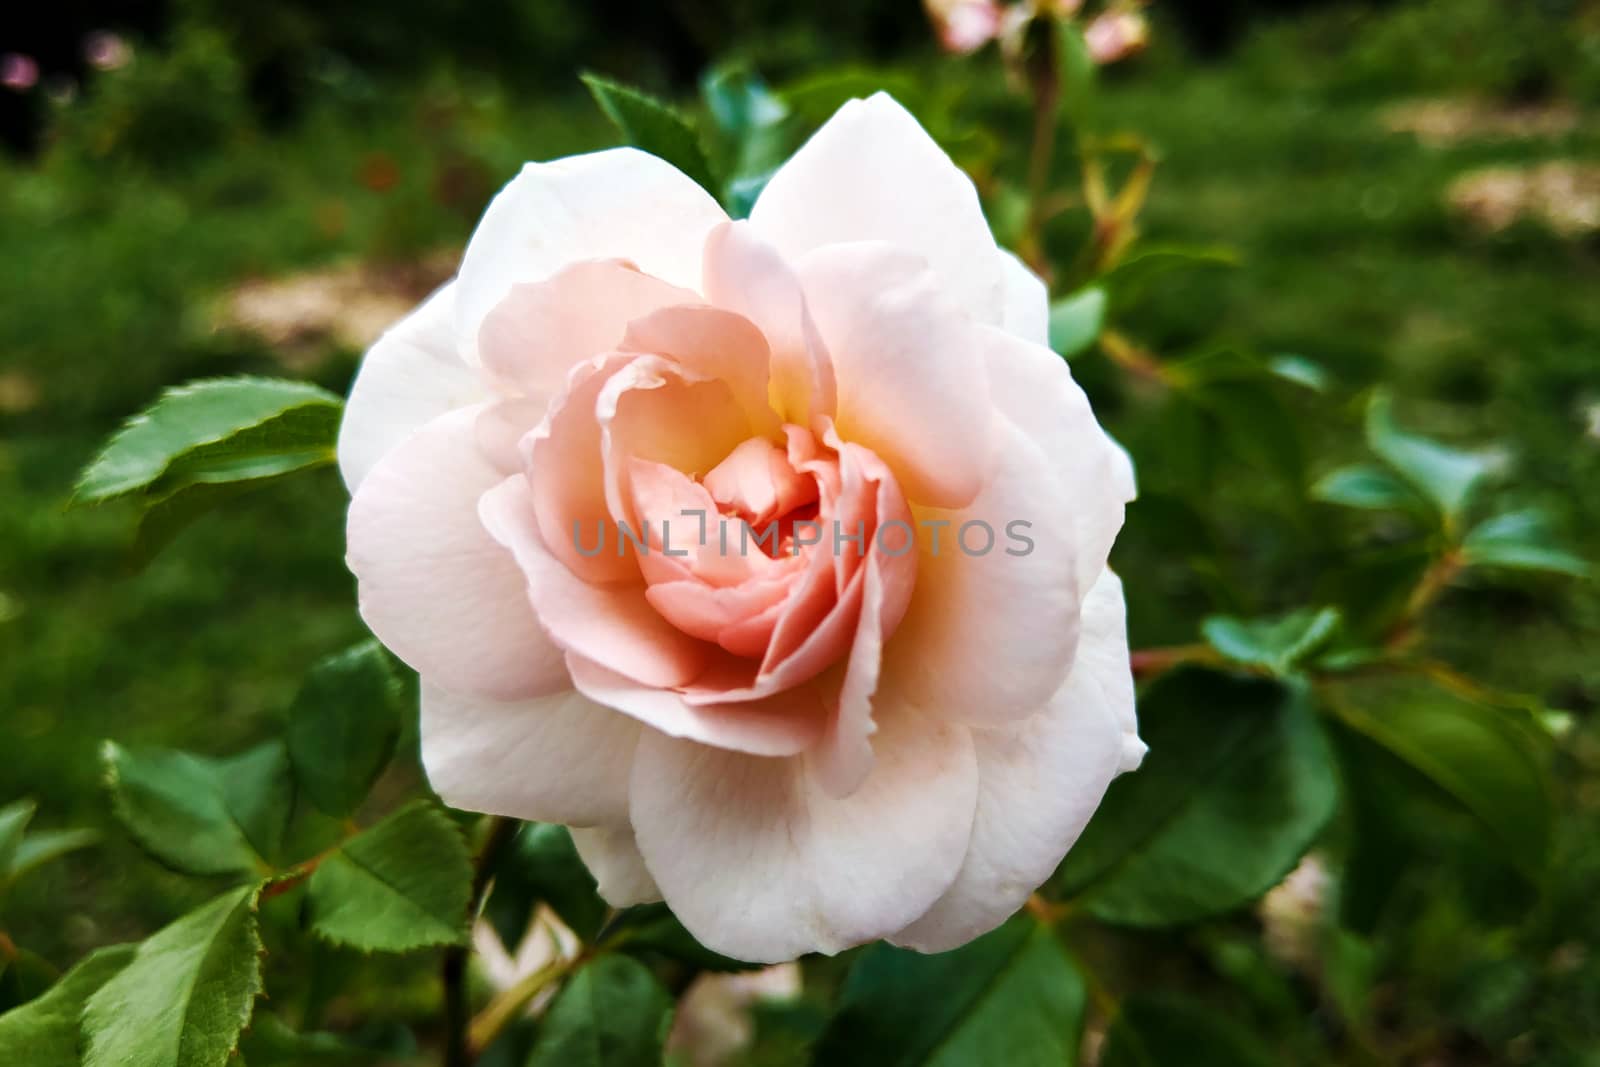 Coral rose flower in roses garden. Top view. Soft focus